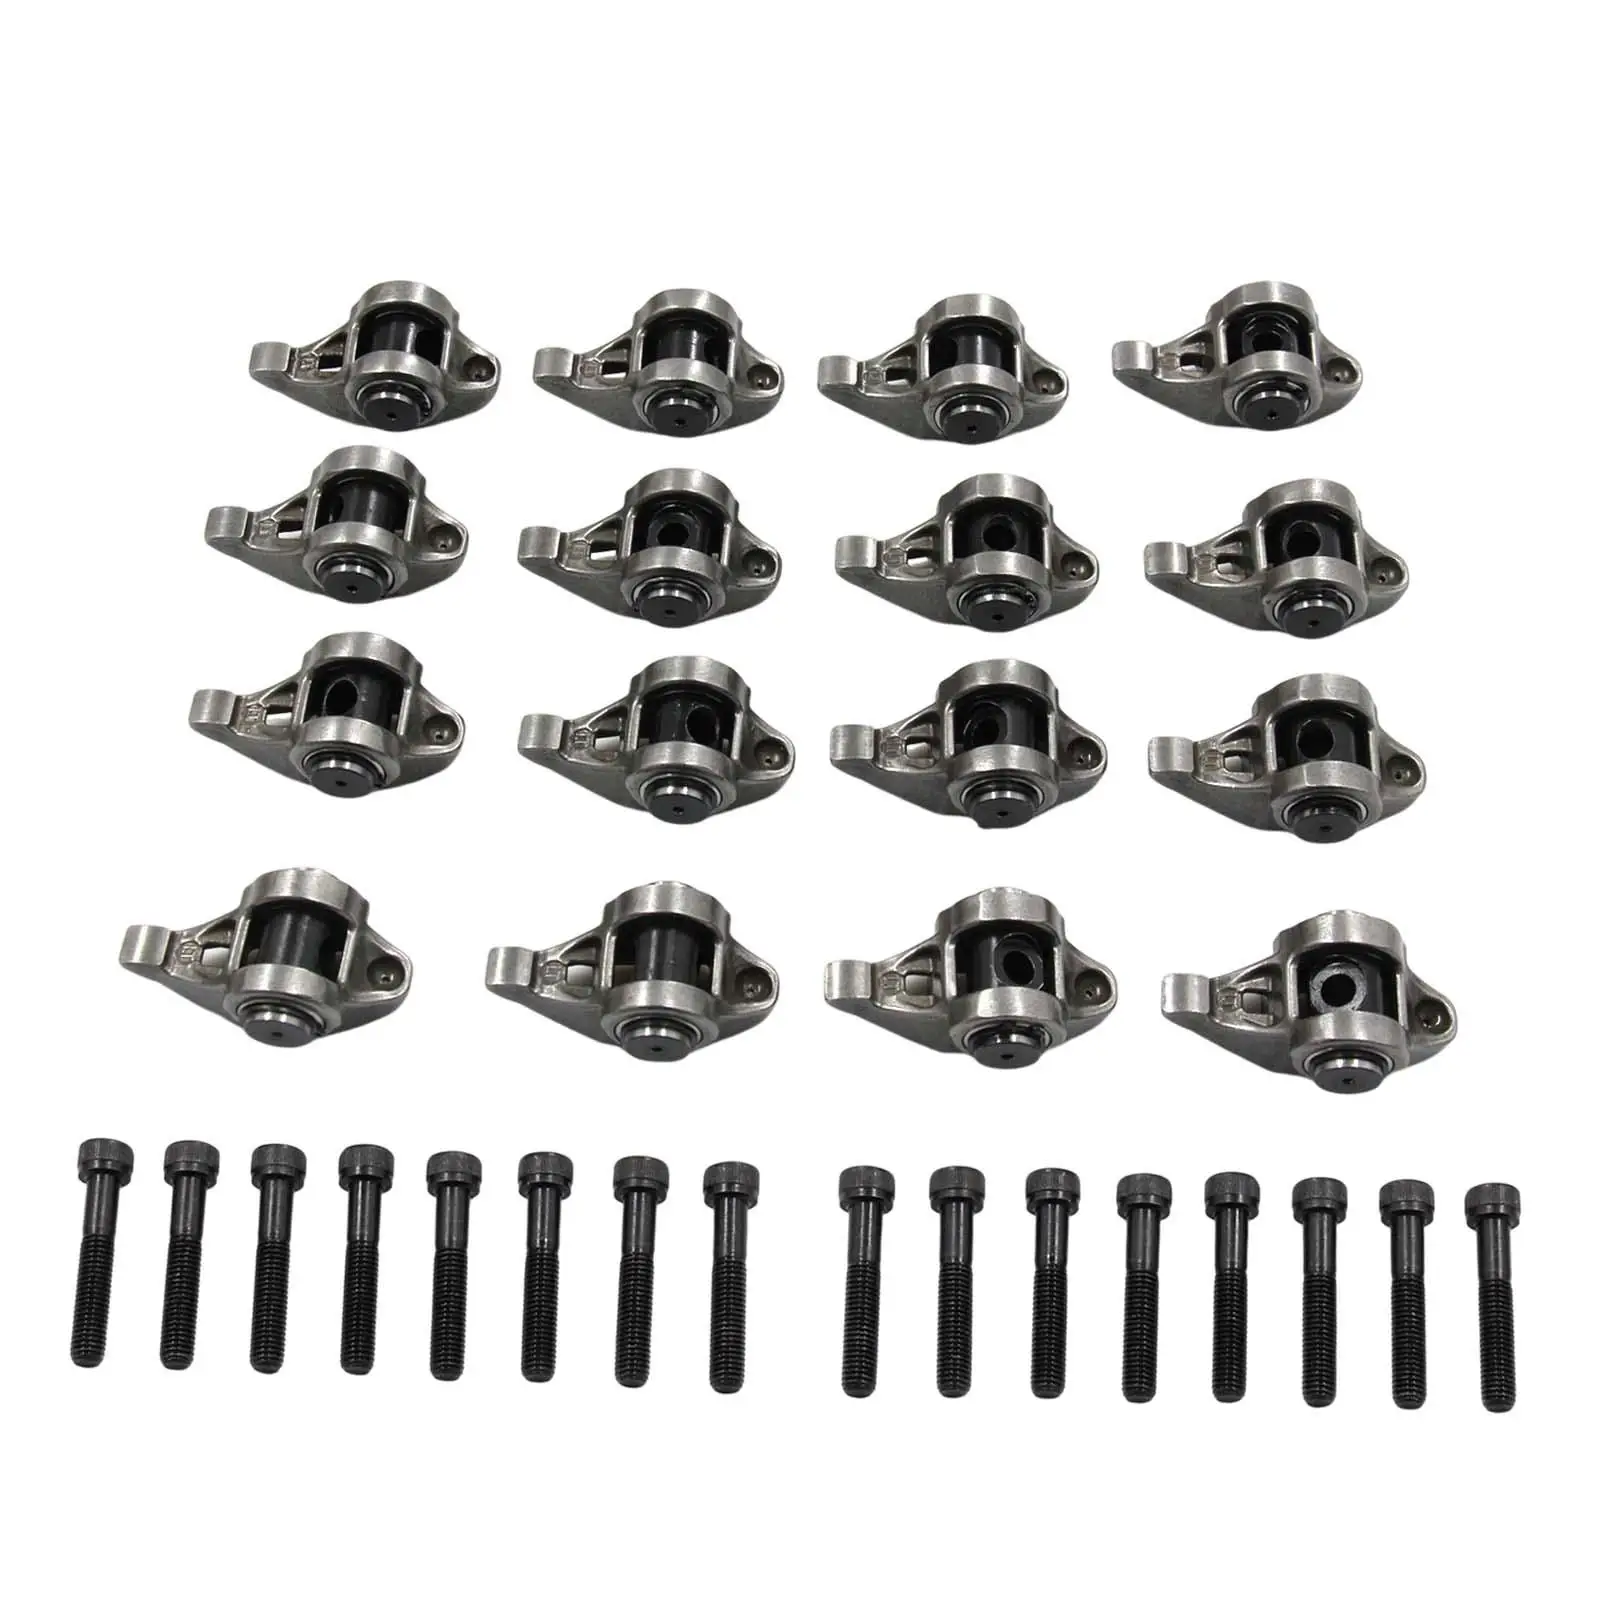 16x Rocker Arms and Bolts with Trunion Kit 10214664 Easy Installation for Chevrolet LS1 LS2 LS3 LS6 4.8 5.3 5.7 6.0 Engines